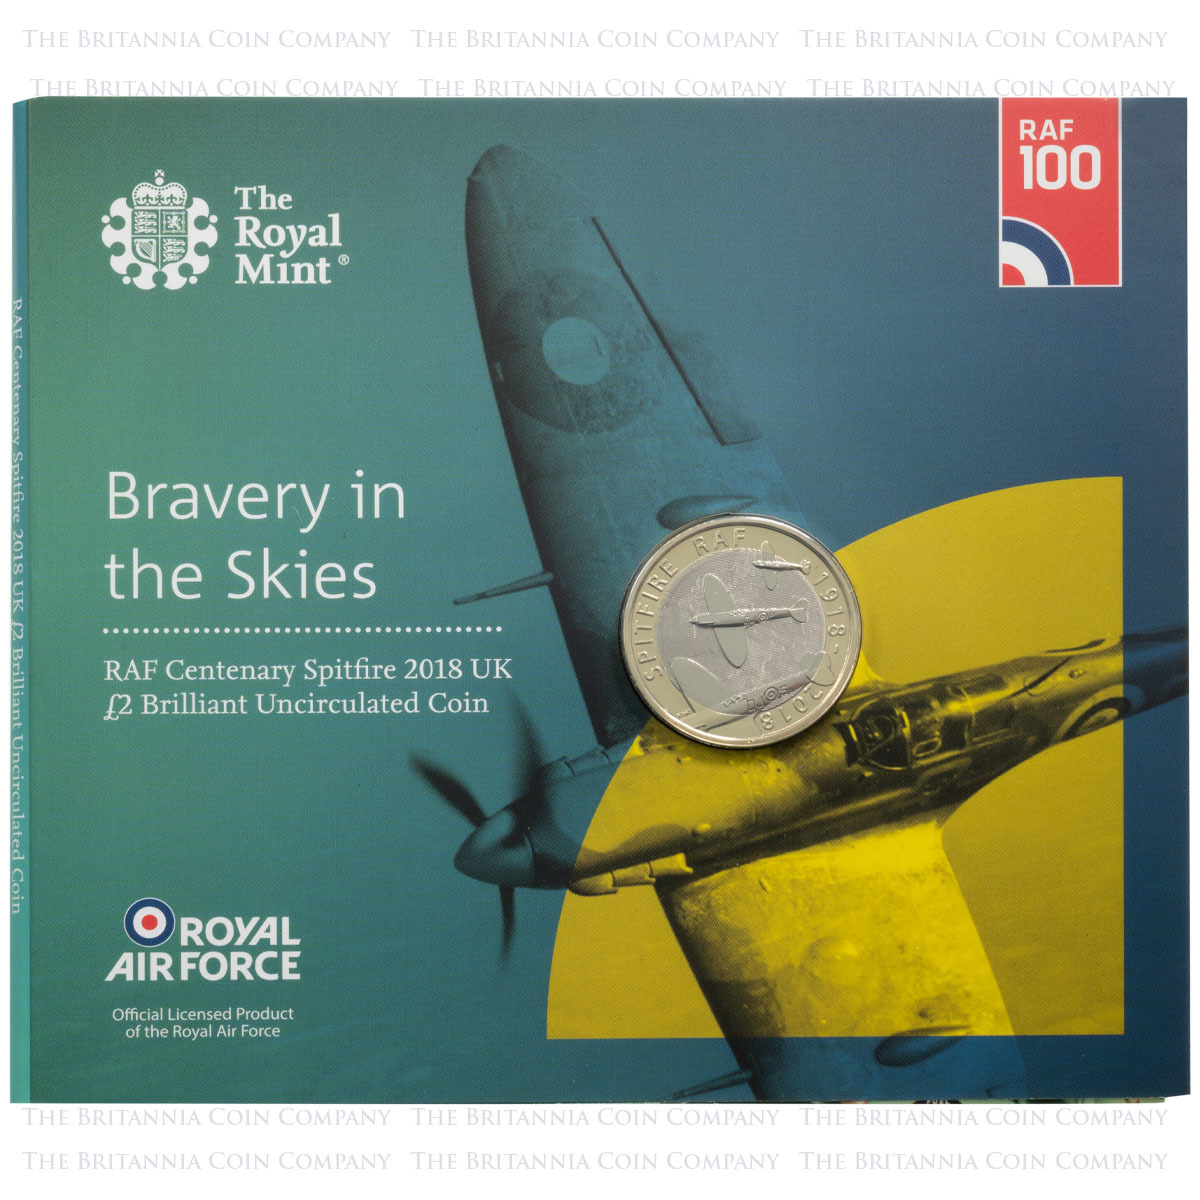 UK18SPBU 2018 RAF Royal Air Force Centenary Spitfire Two Pound Brilliant Uncirculated Coin In Folder